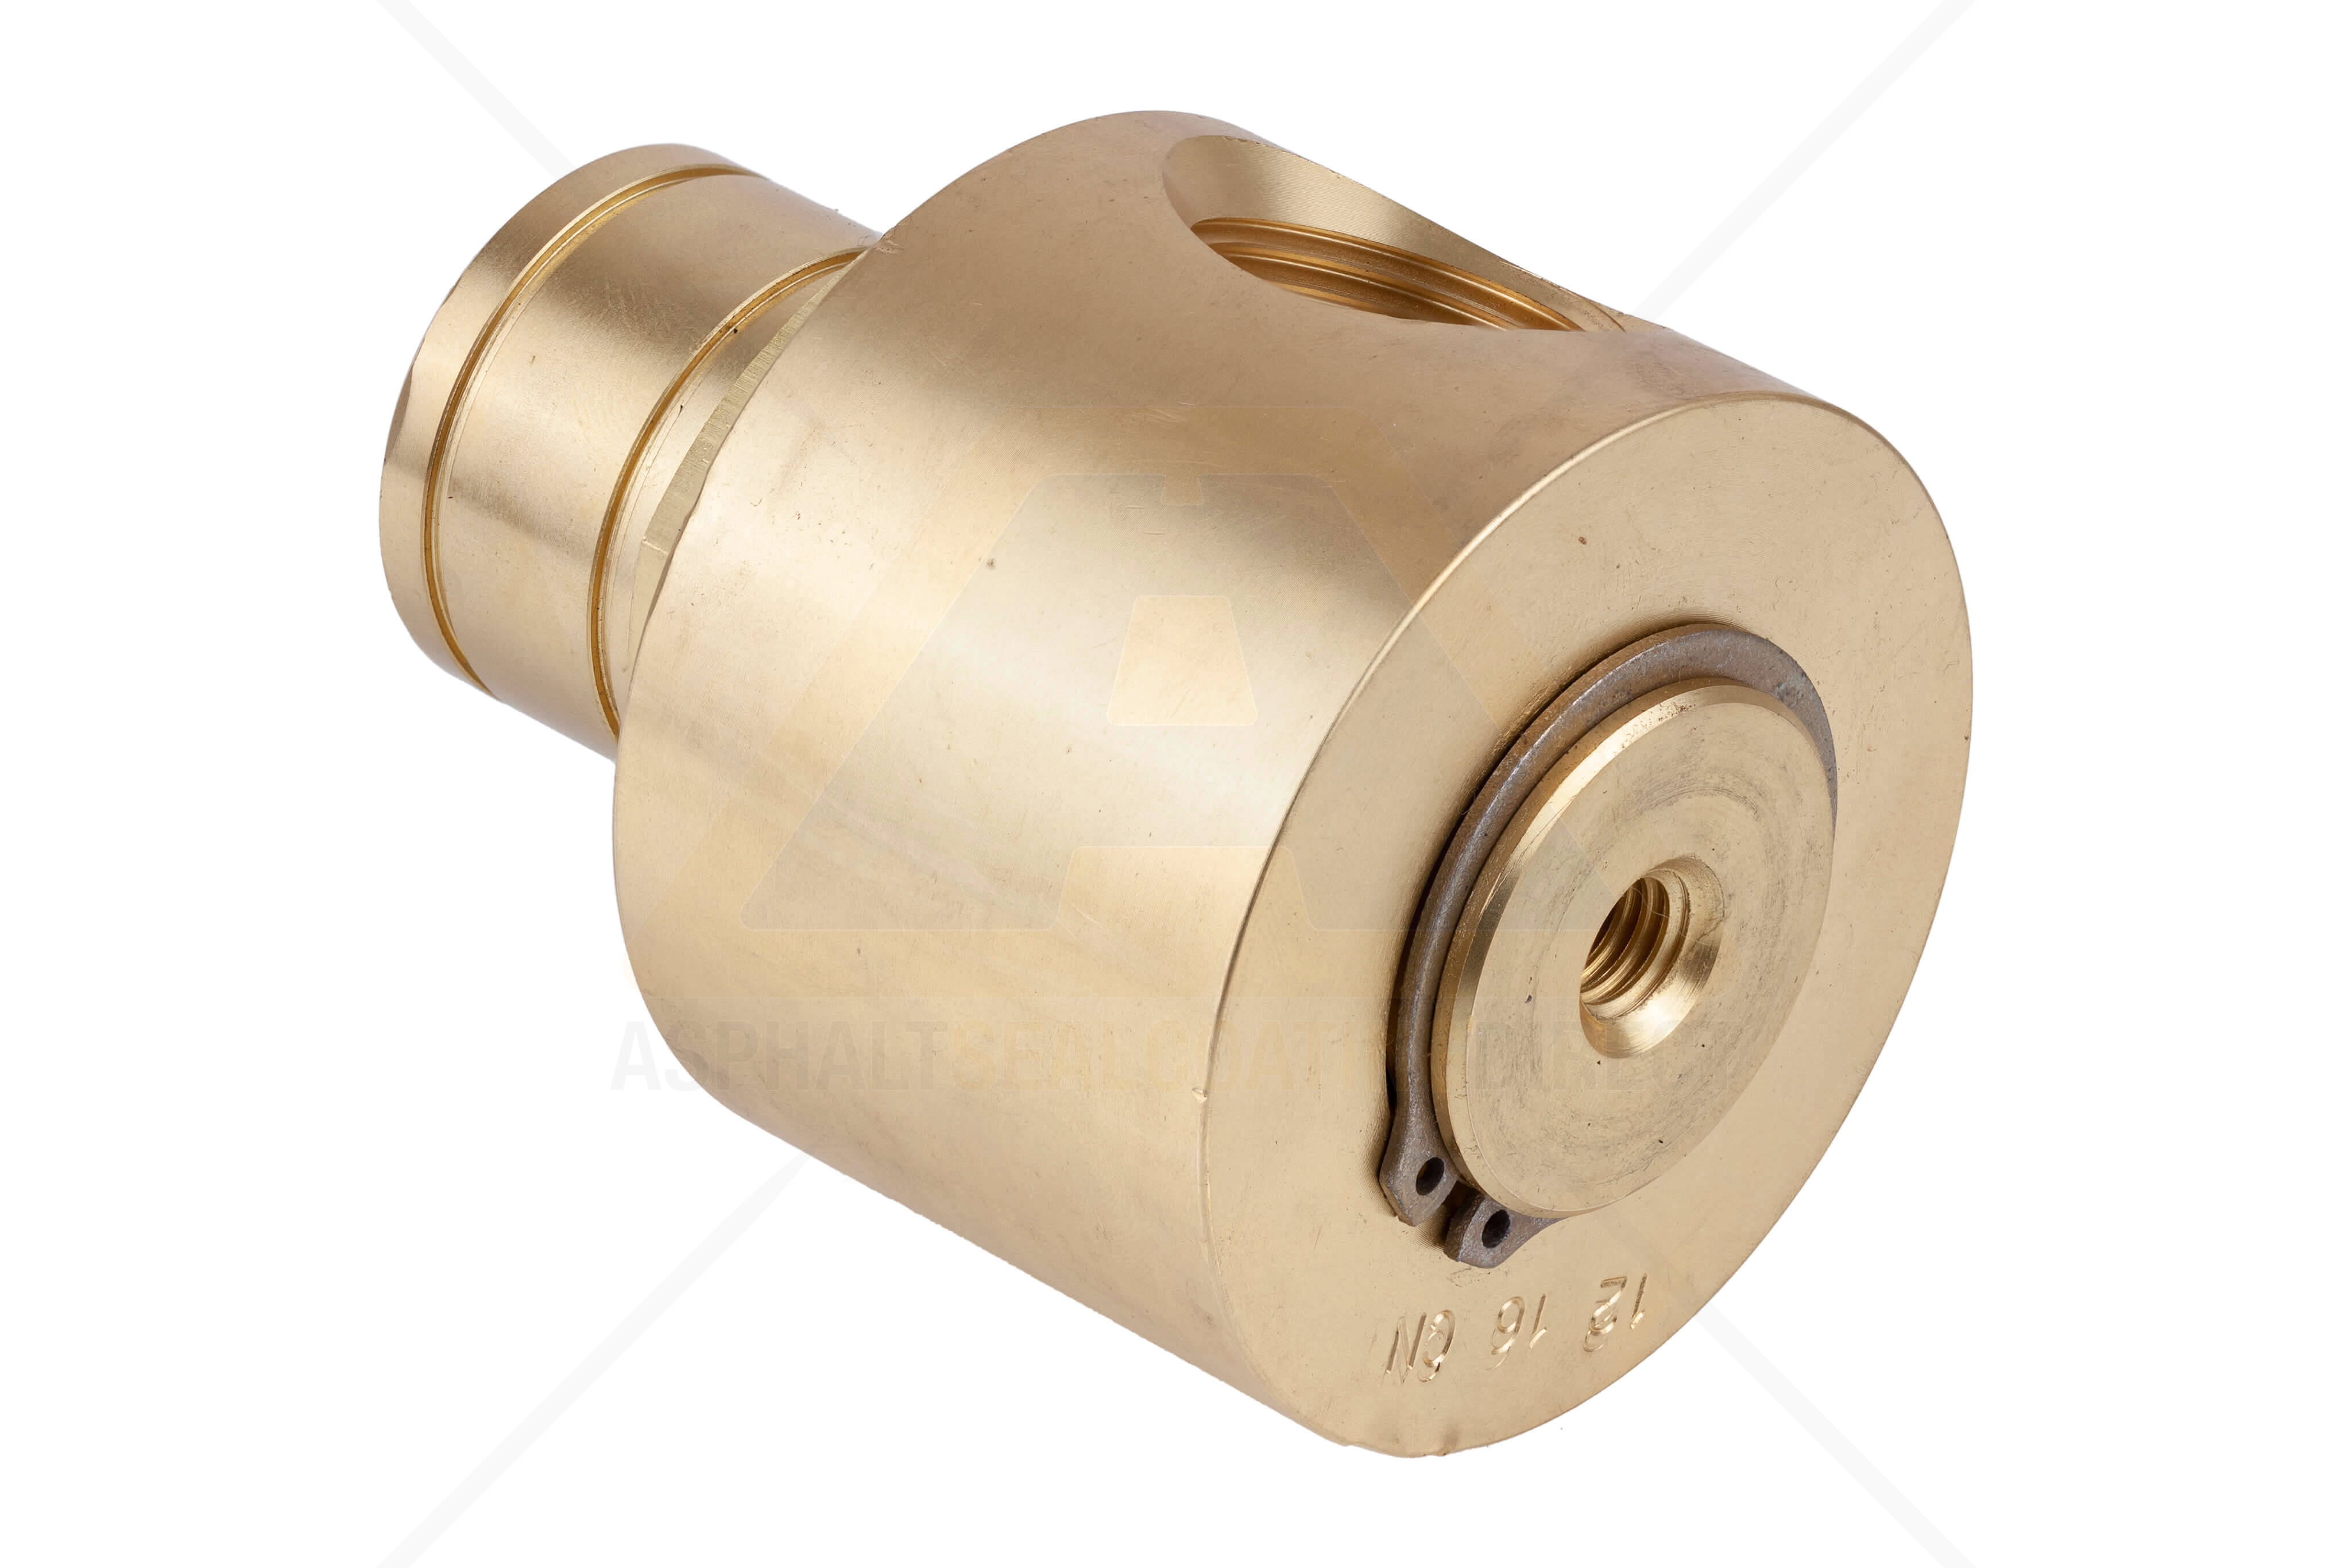 CoxReels Hose Reel Brass Union Swivel Replacement - 426 For Sale